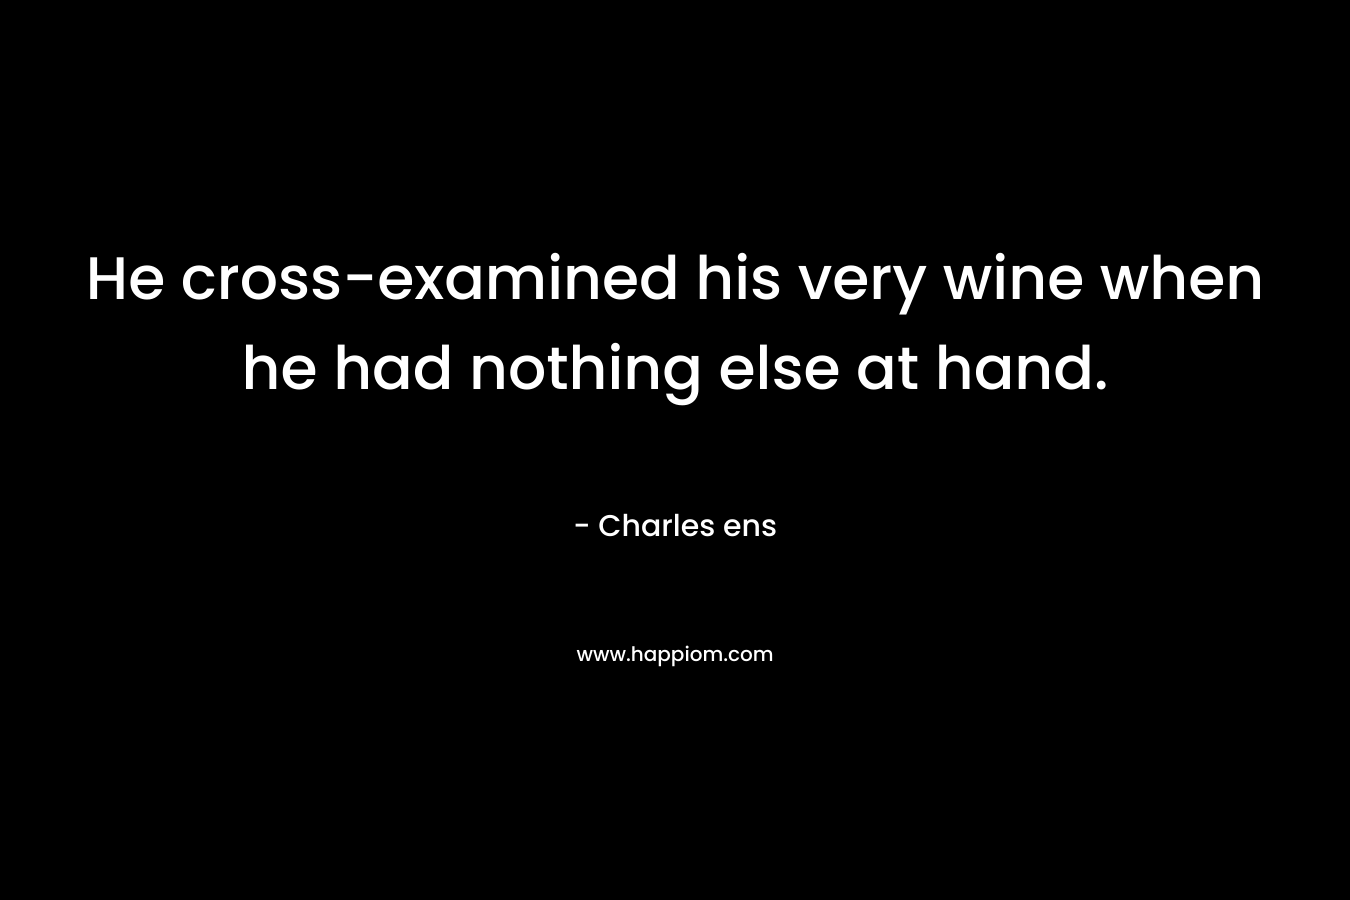 He cross-examined his very wine when he had nothing else at hand.